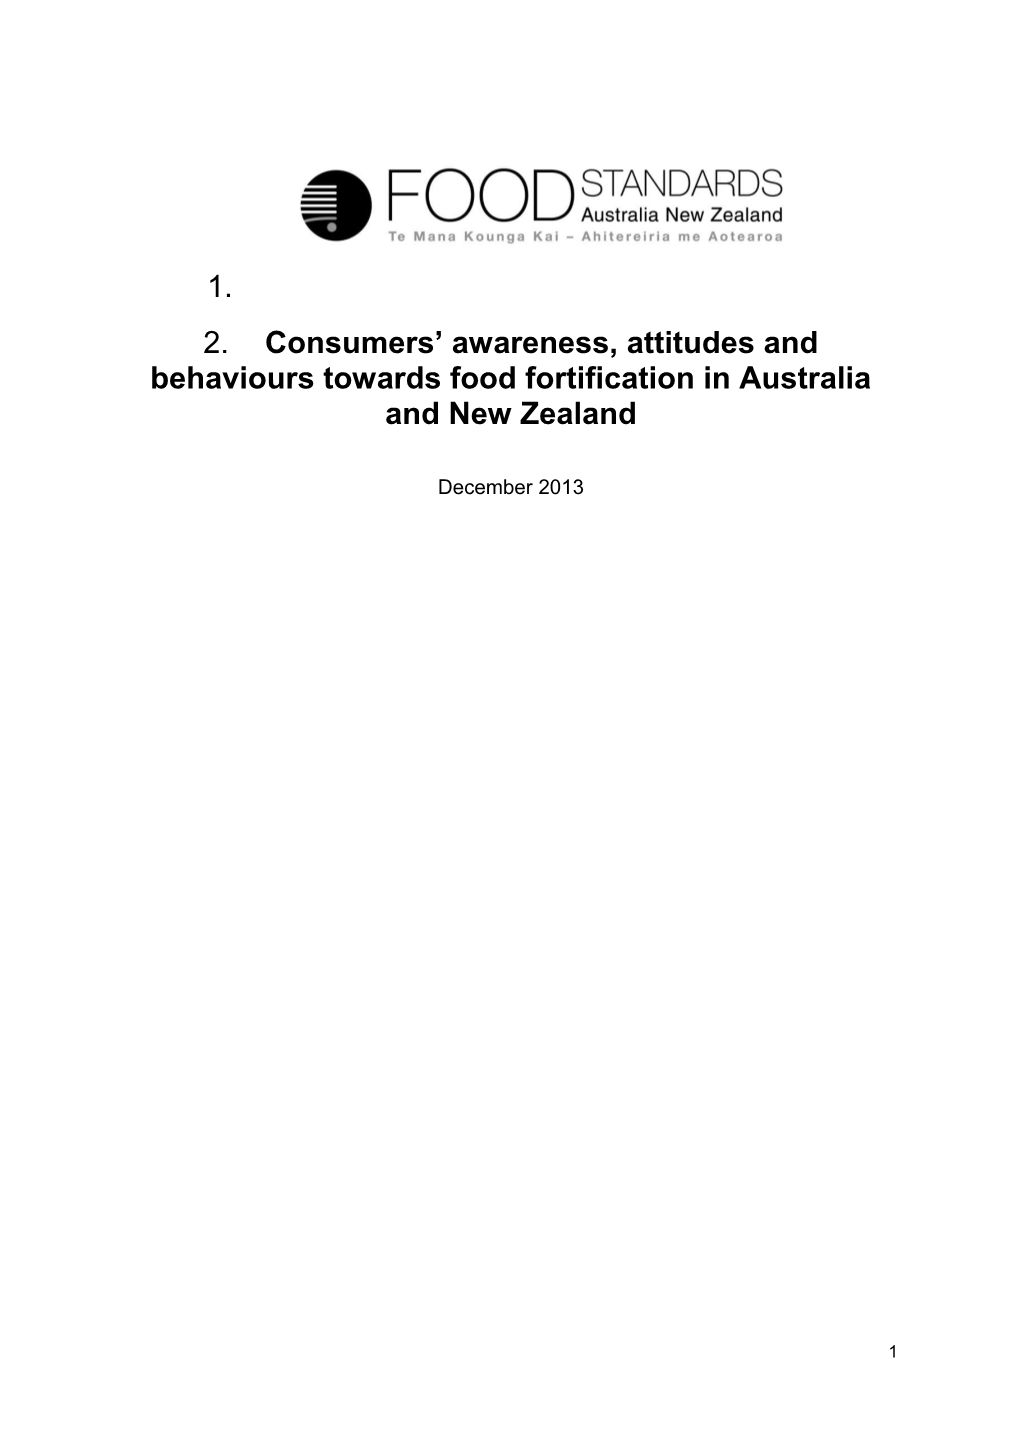 Consumers Awareness, Attitudes and Behaviours Towards Food Fortification in Australia And